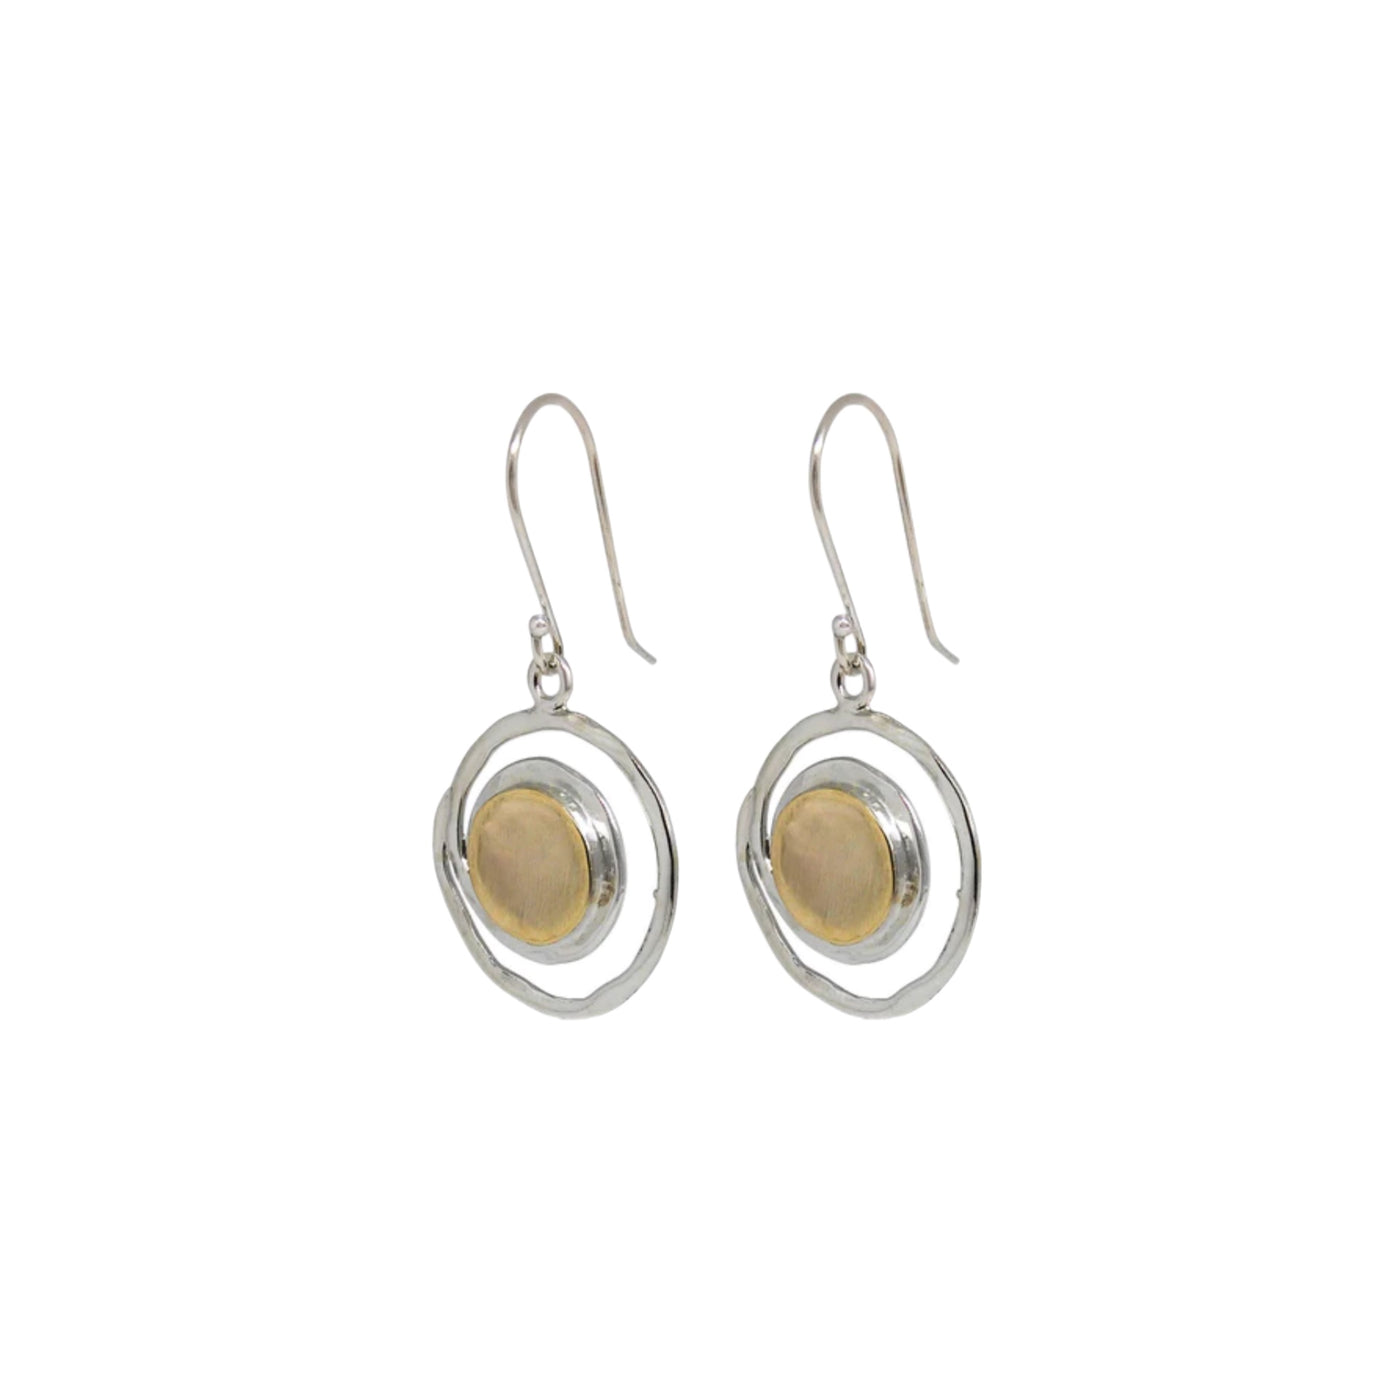 Sterling silver and 9ct yellow gold handcrafted Israeli drop earrings